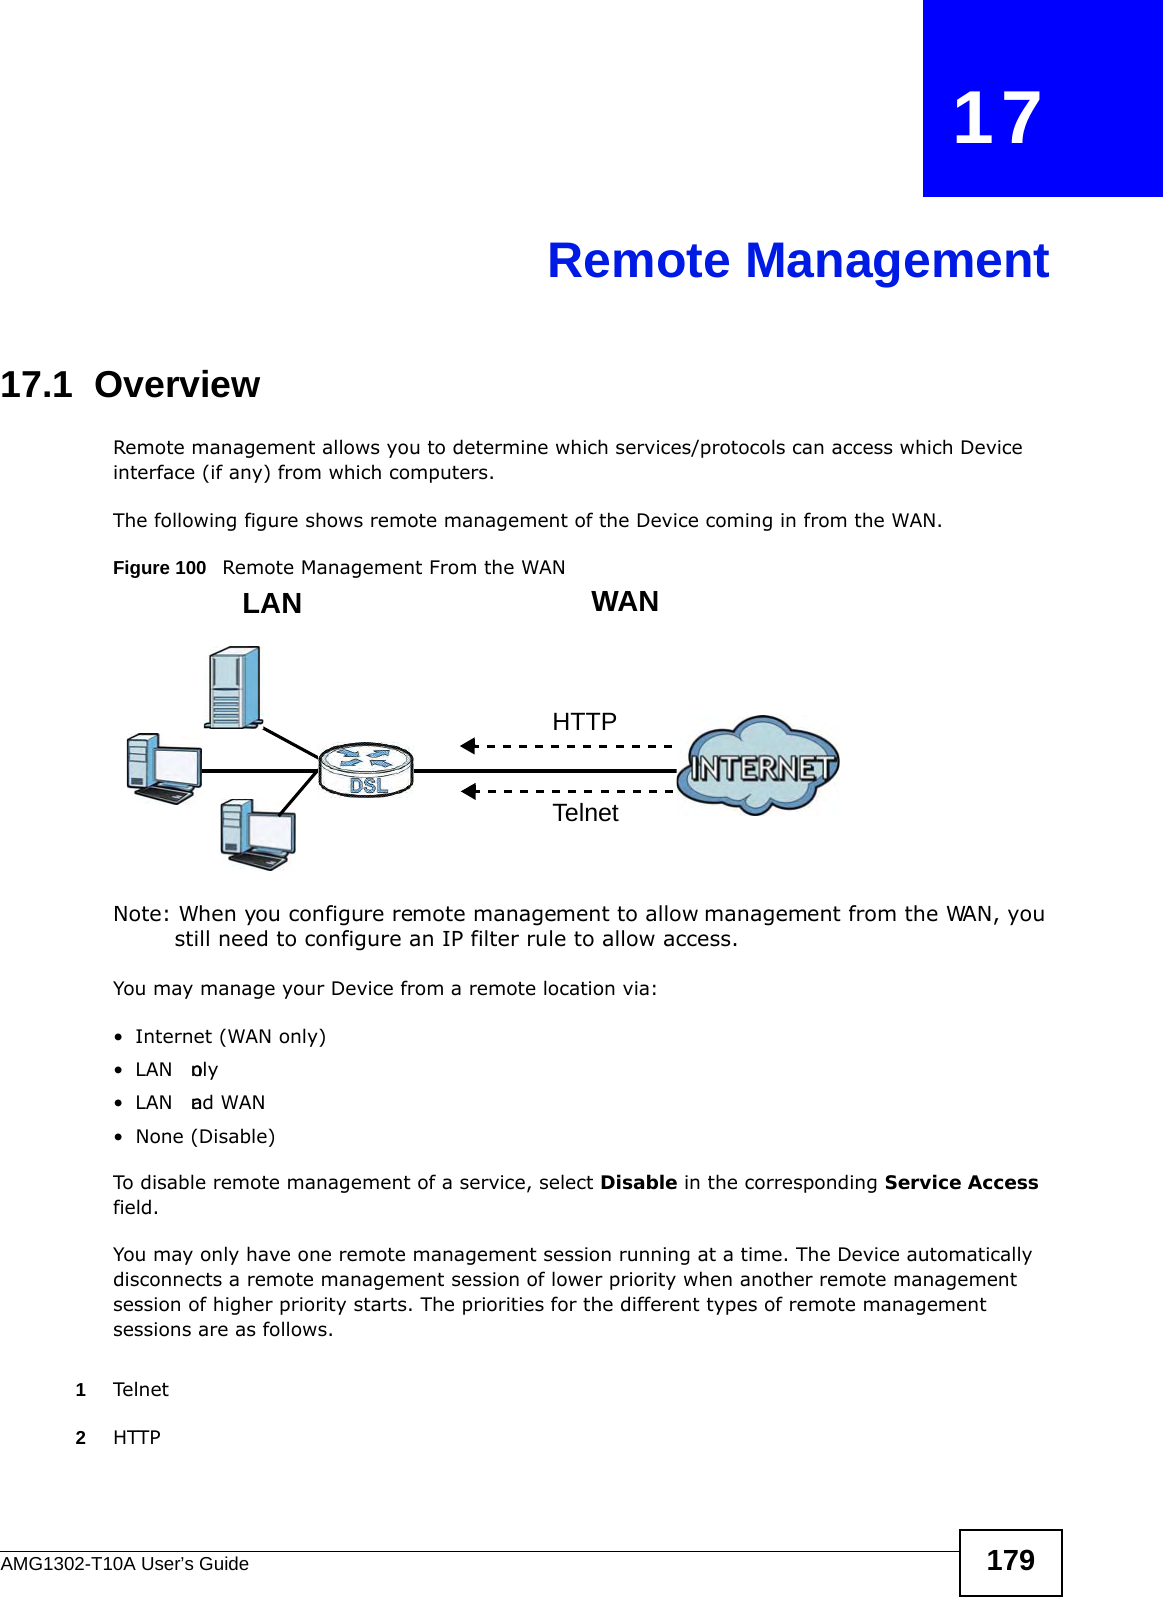 AMG1302-T10A User’s Guide 179CHAPTER   17Remote Management17.1  OverviewRemote management allows you to determine which services/protocols can access which Device interface (if any) from which computers.The following figure shows remote management of the Device coming in from the WAN.Figure 100   Remote Management From the WANNote: When you configure remote management to allow management from the WAN, you still need to configure an IP filter rule to allow access.You may manage your Device from a remote location via:• Internet (WAN only)•LAN  only•LAN  and WAN• None (Disable)To disable remote management of a service, select Disable in the corresponding Service Access field.You may only have one remote management session running at a time. The Device automatically disconnects a remote management session of lower priority when another remote management session of higher priority starts. The priorities for the different types of remote management sessions are as follows.1Telnet2HTTPLAN WANHTTPTelnet